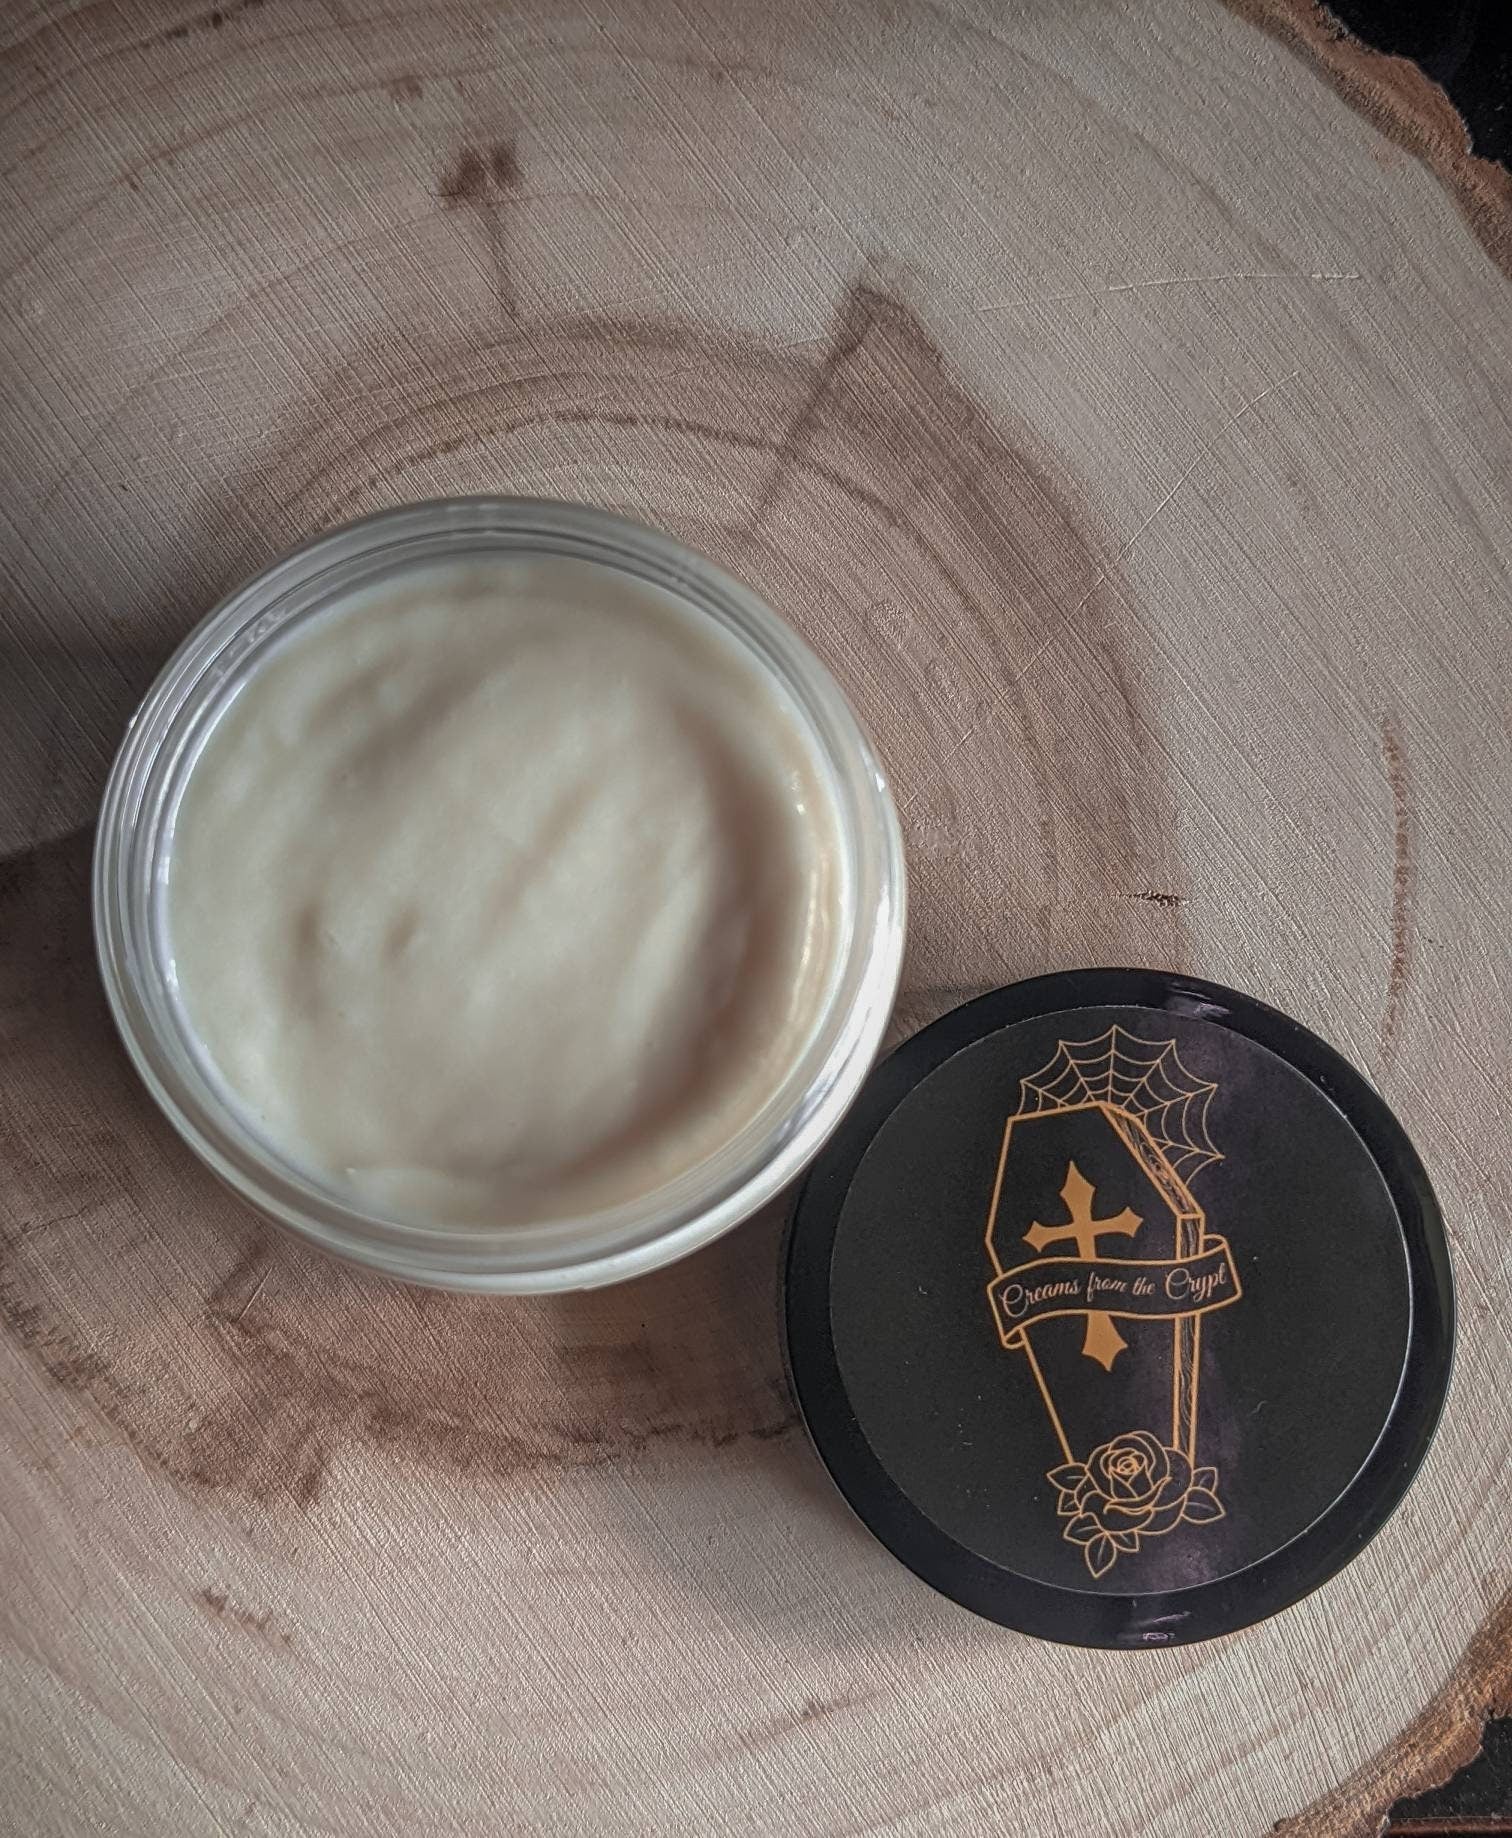 SKIN AND BONES - Unscented, Vegan whipped body butter, Shea, mango butter, moisturizer, fair trade ingredients, hydrating, gothic skincare